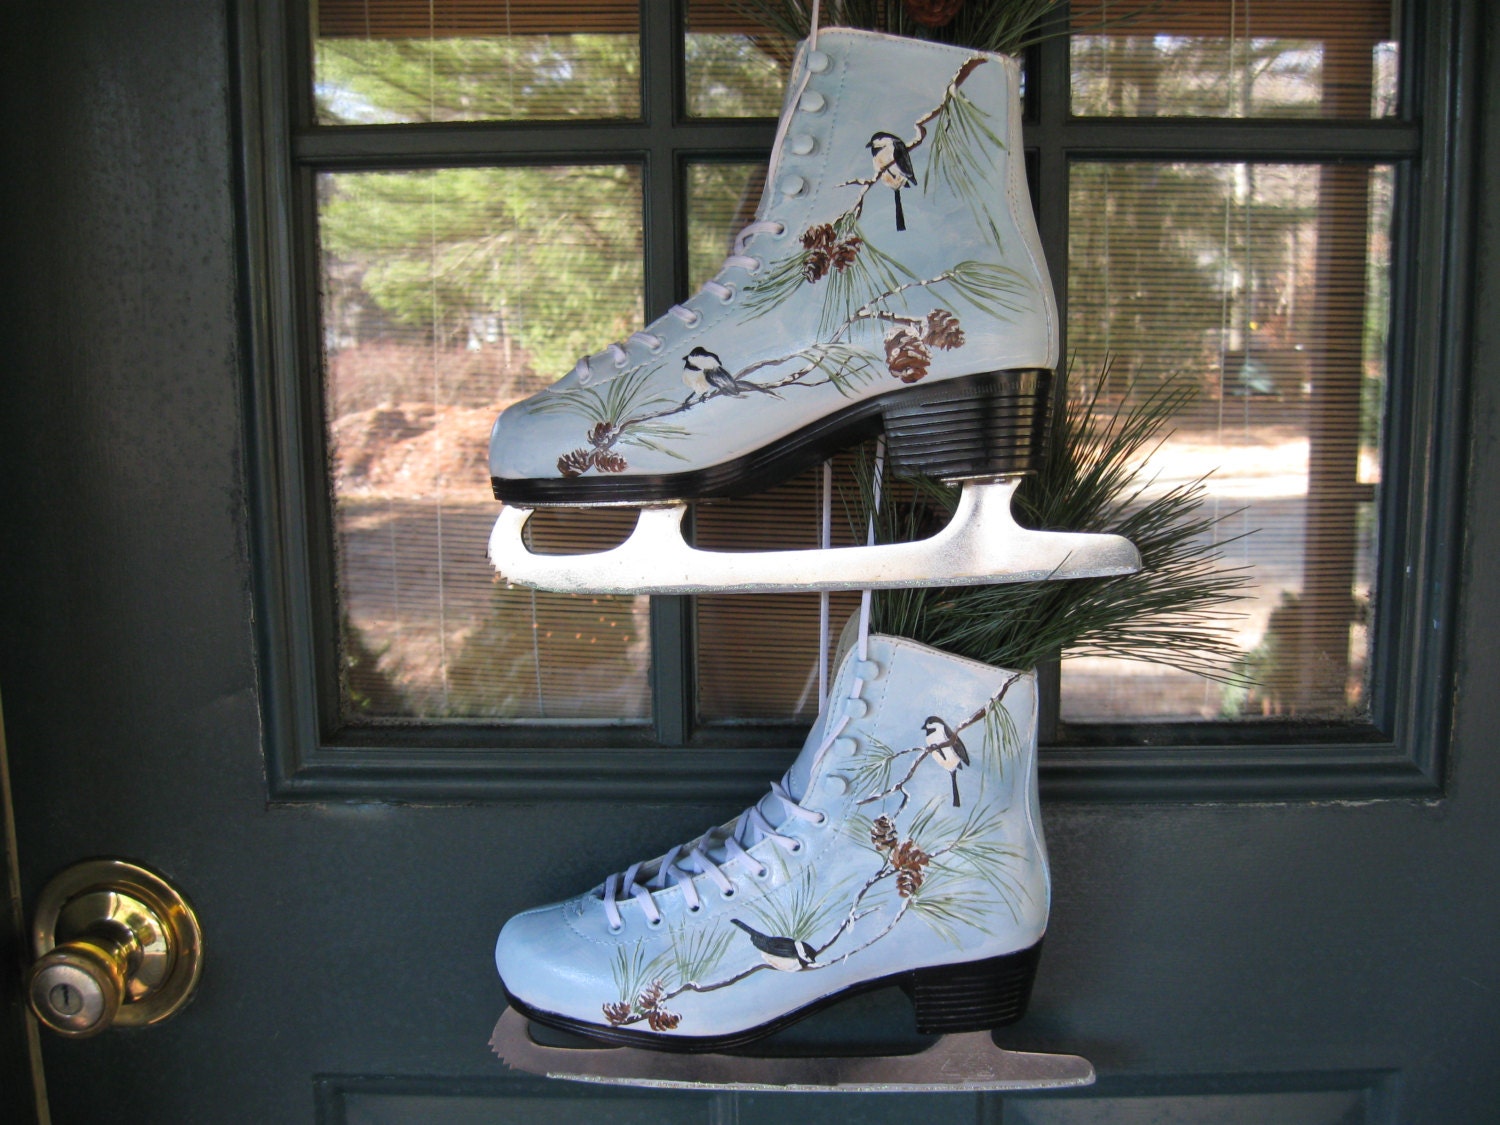 Up-cycled Ice Skates hand-painted